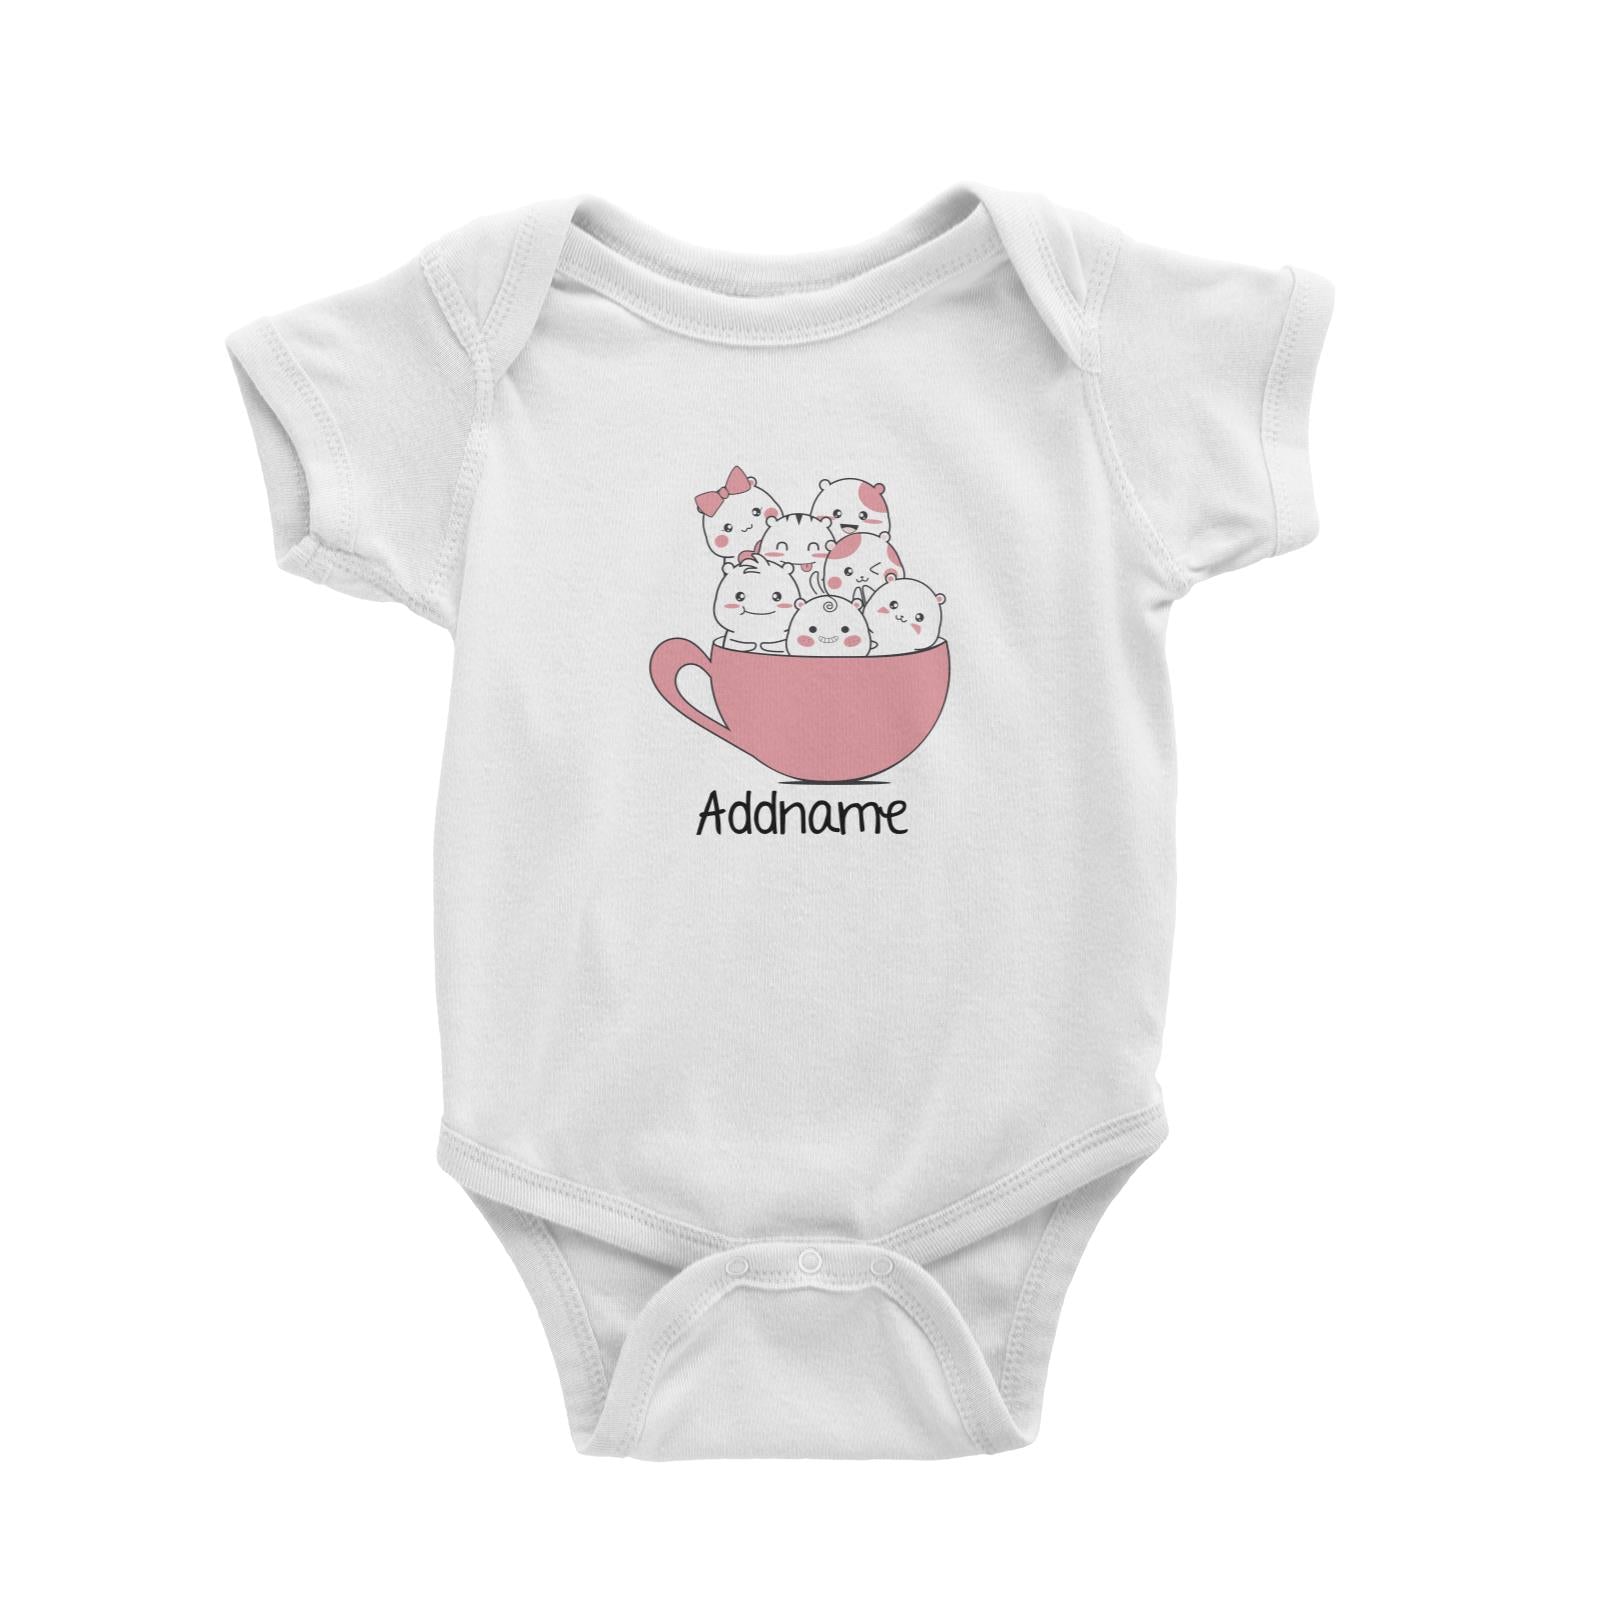 Cute Animals And Friends Series Cute Hamster Group Coffee Cup Addname Baby Romper